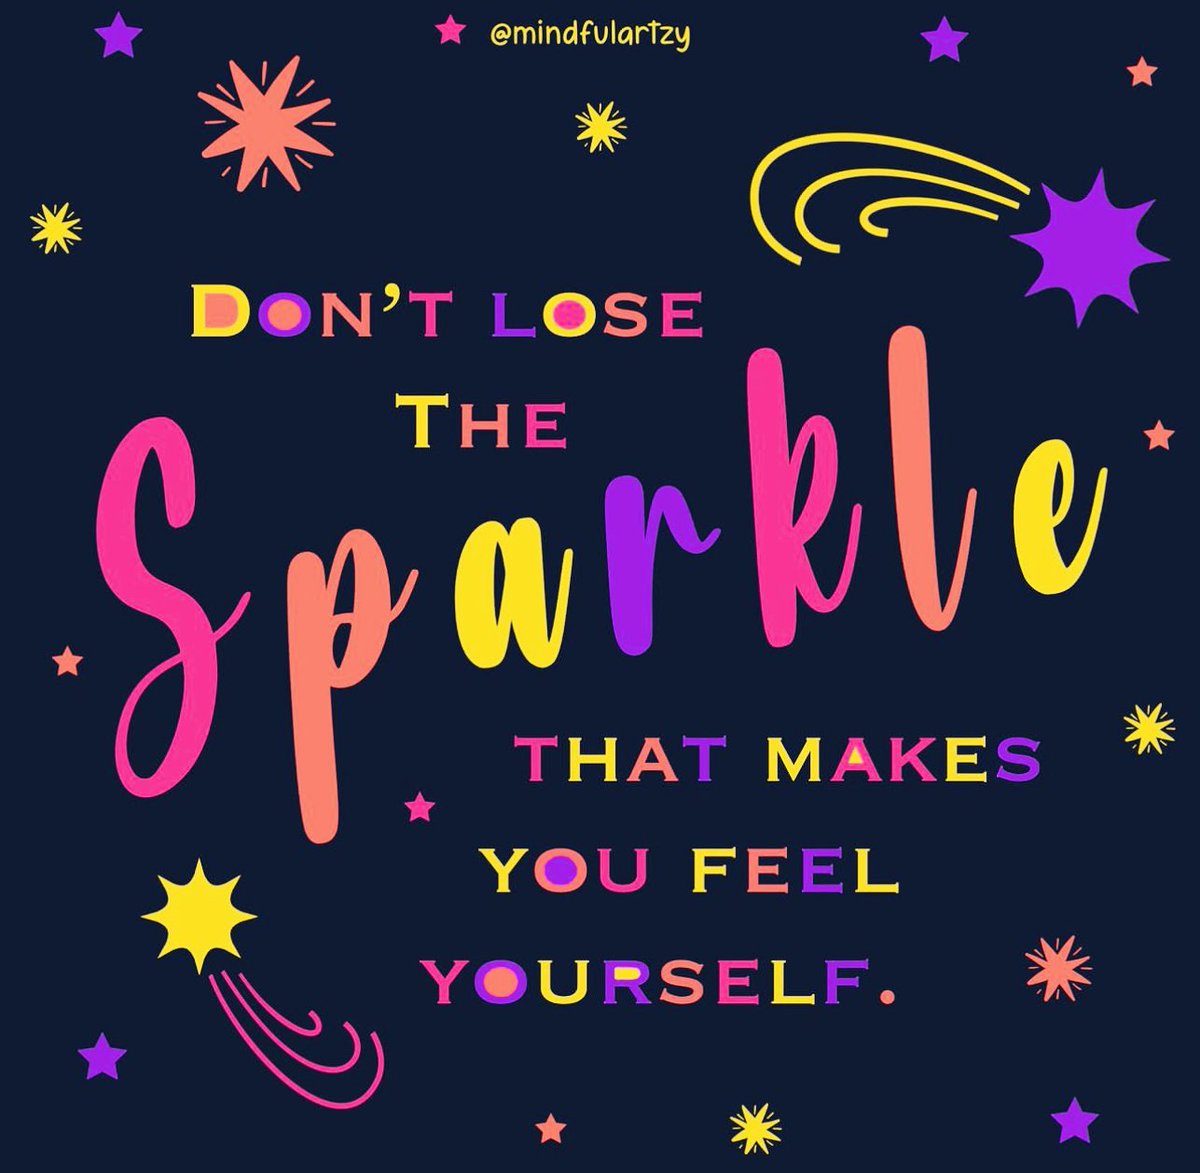 Happy Saturday and your daily dose of inspiration!💕

Keep shining!
Keep sparkling!
Keep being YOU!
💕

Grateful for the opportunity to live, love, and lead.💕

#ALLmeansALL #GreenfieldGuarantee #ProudtobeGUSD
#CultivateCuriosity
#TrustAndInspire
#TrustAndGrow #GUSDReadersShine